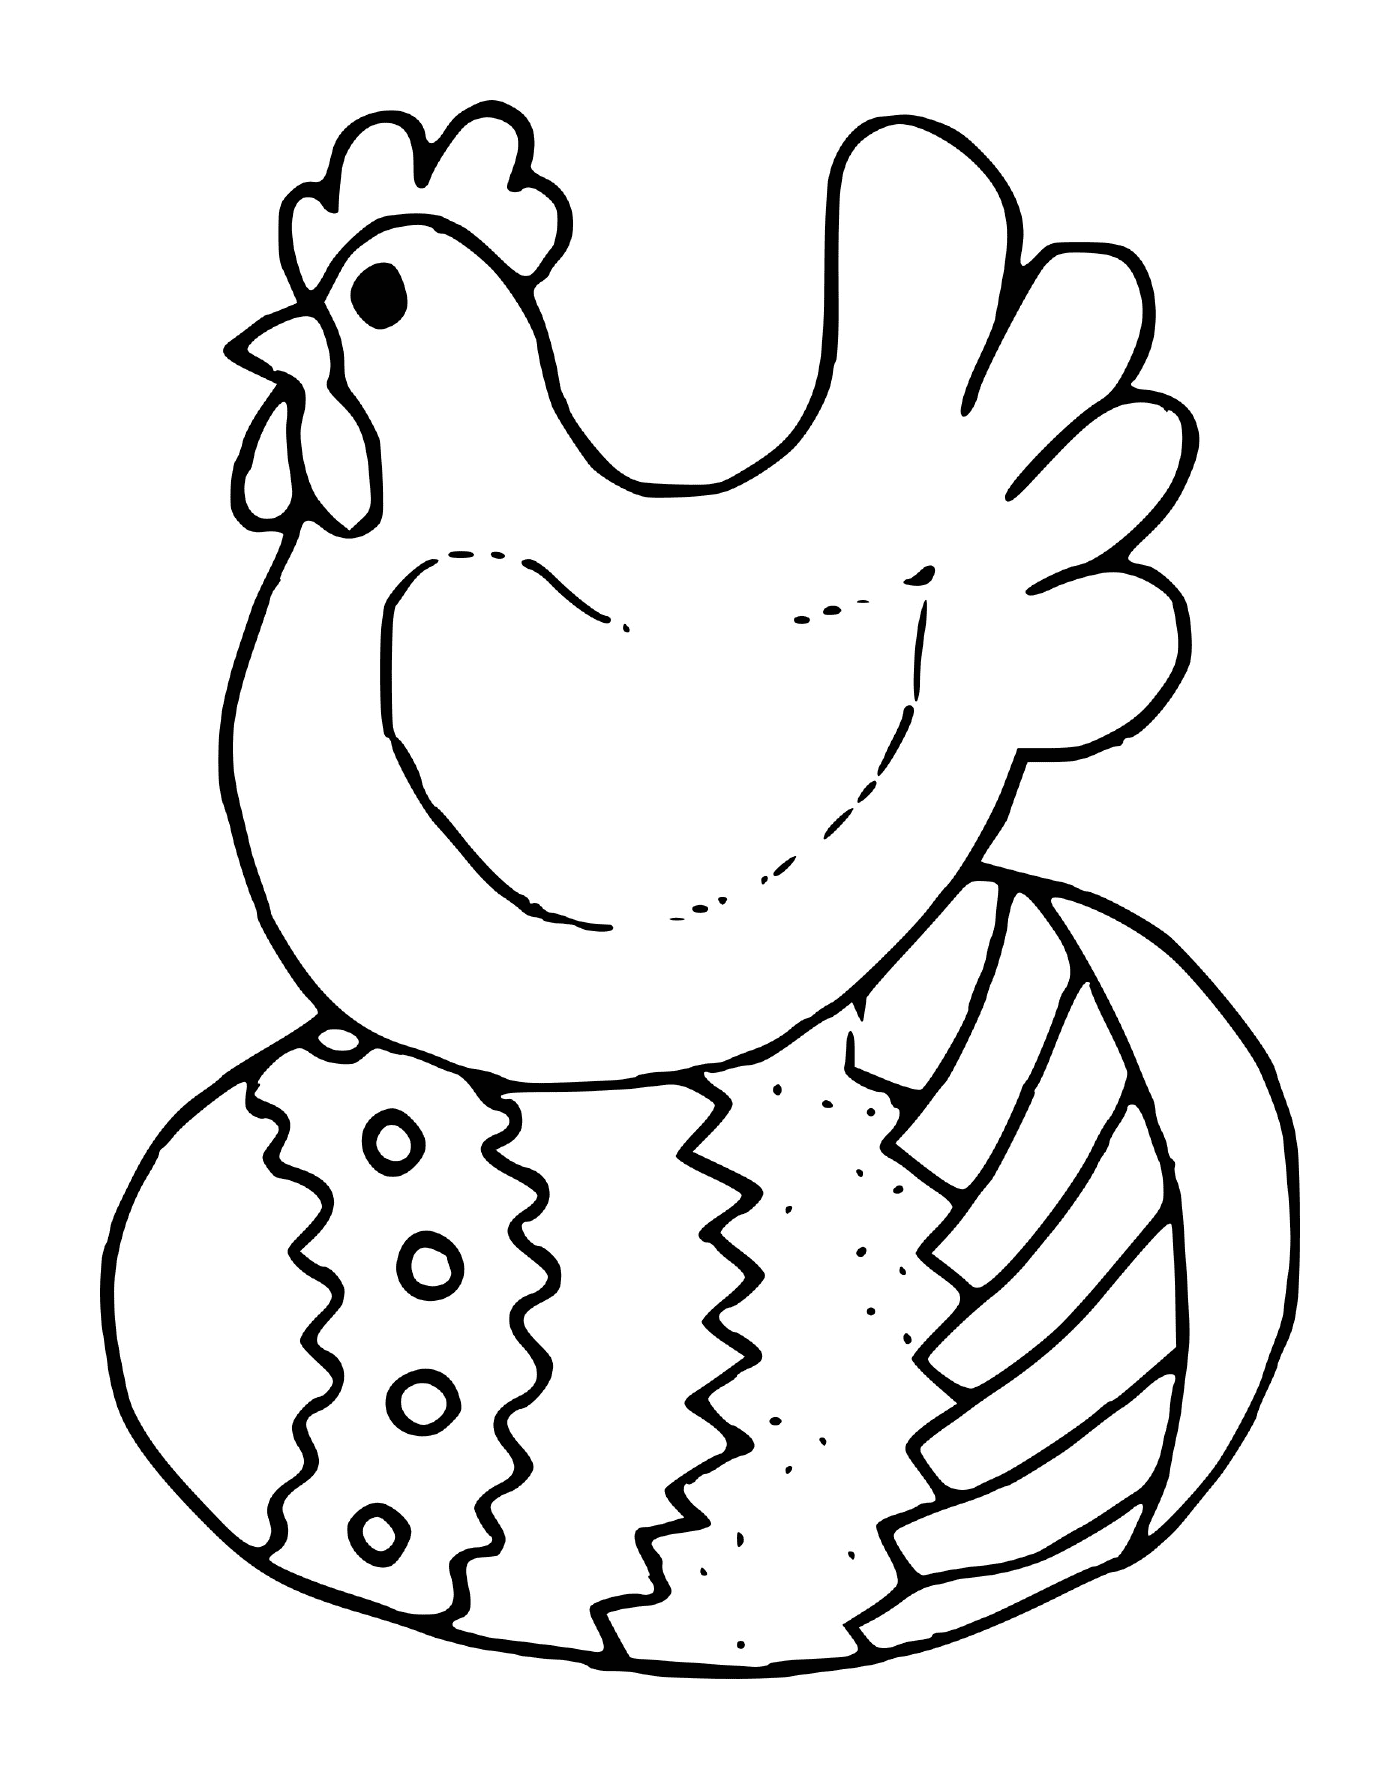  Turkey with Easter eggs 